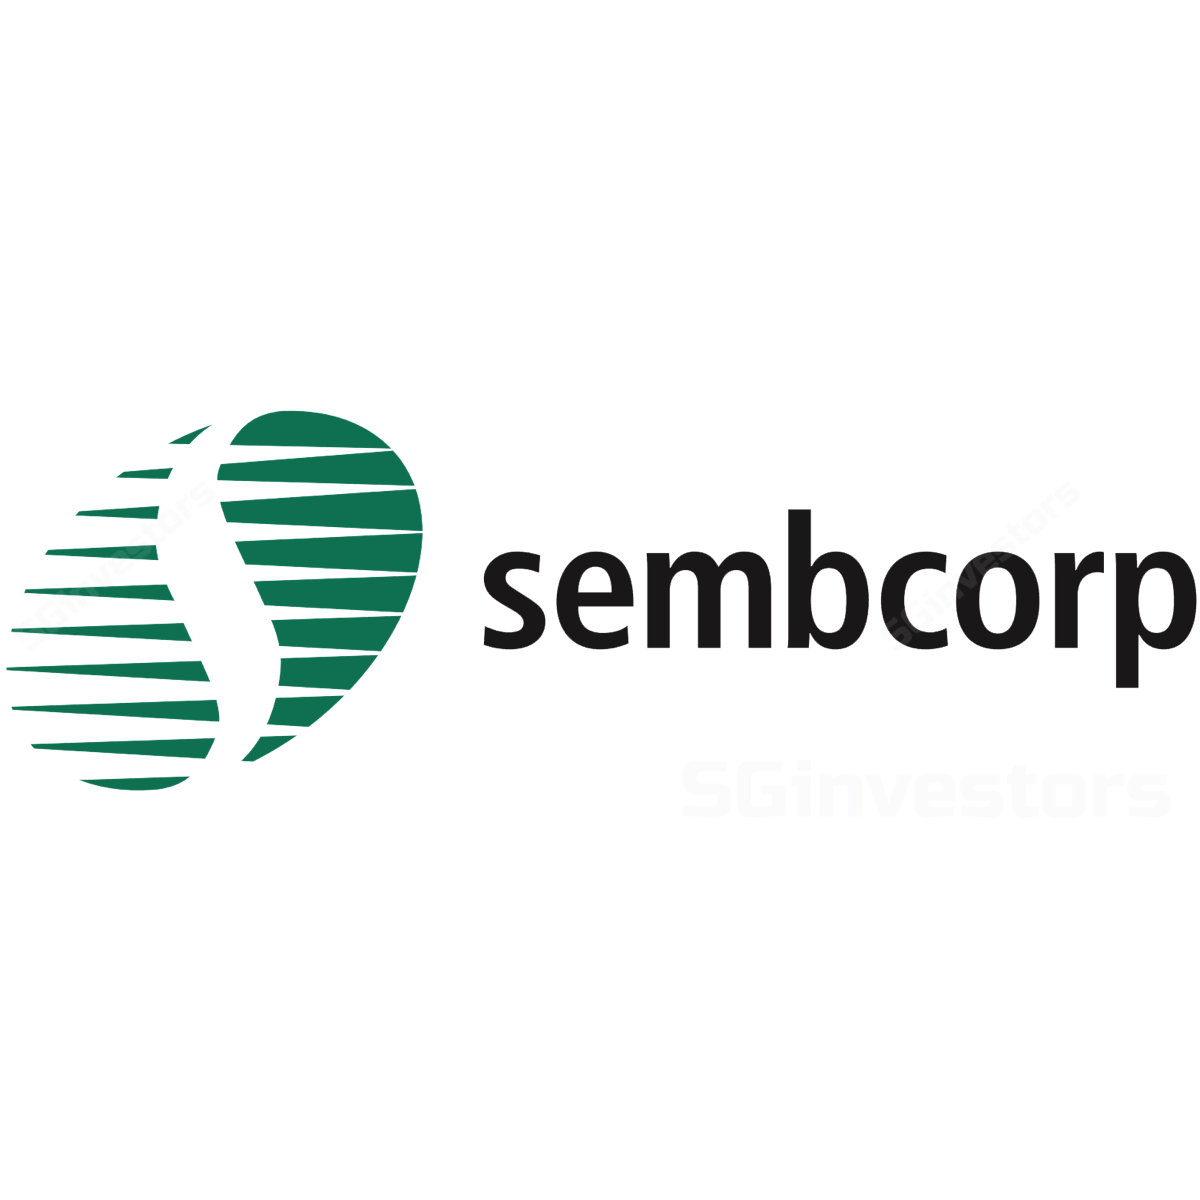 Sembcorp Industries - DBS Vickers 2017-02-24: Slowly but surely